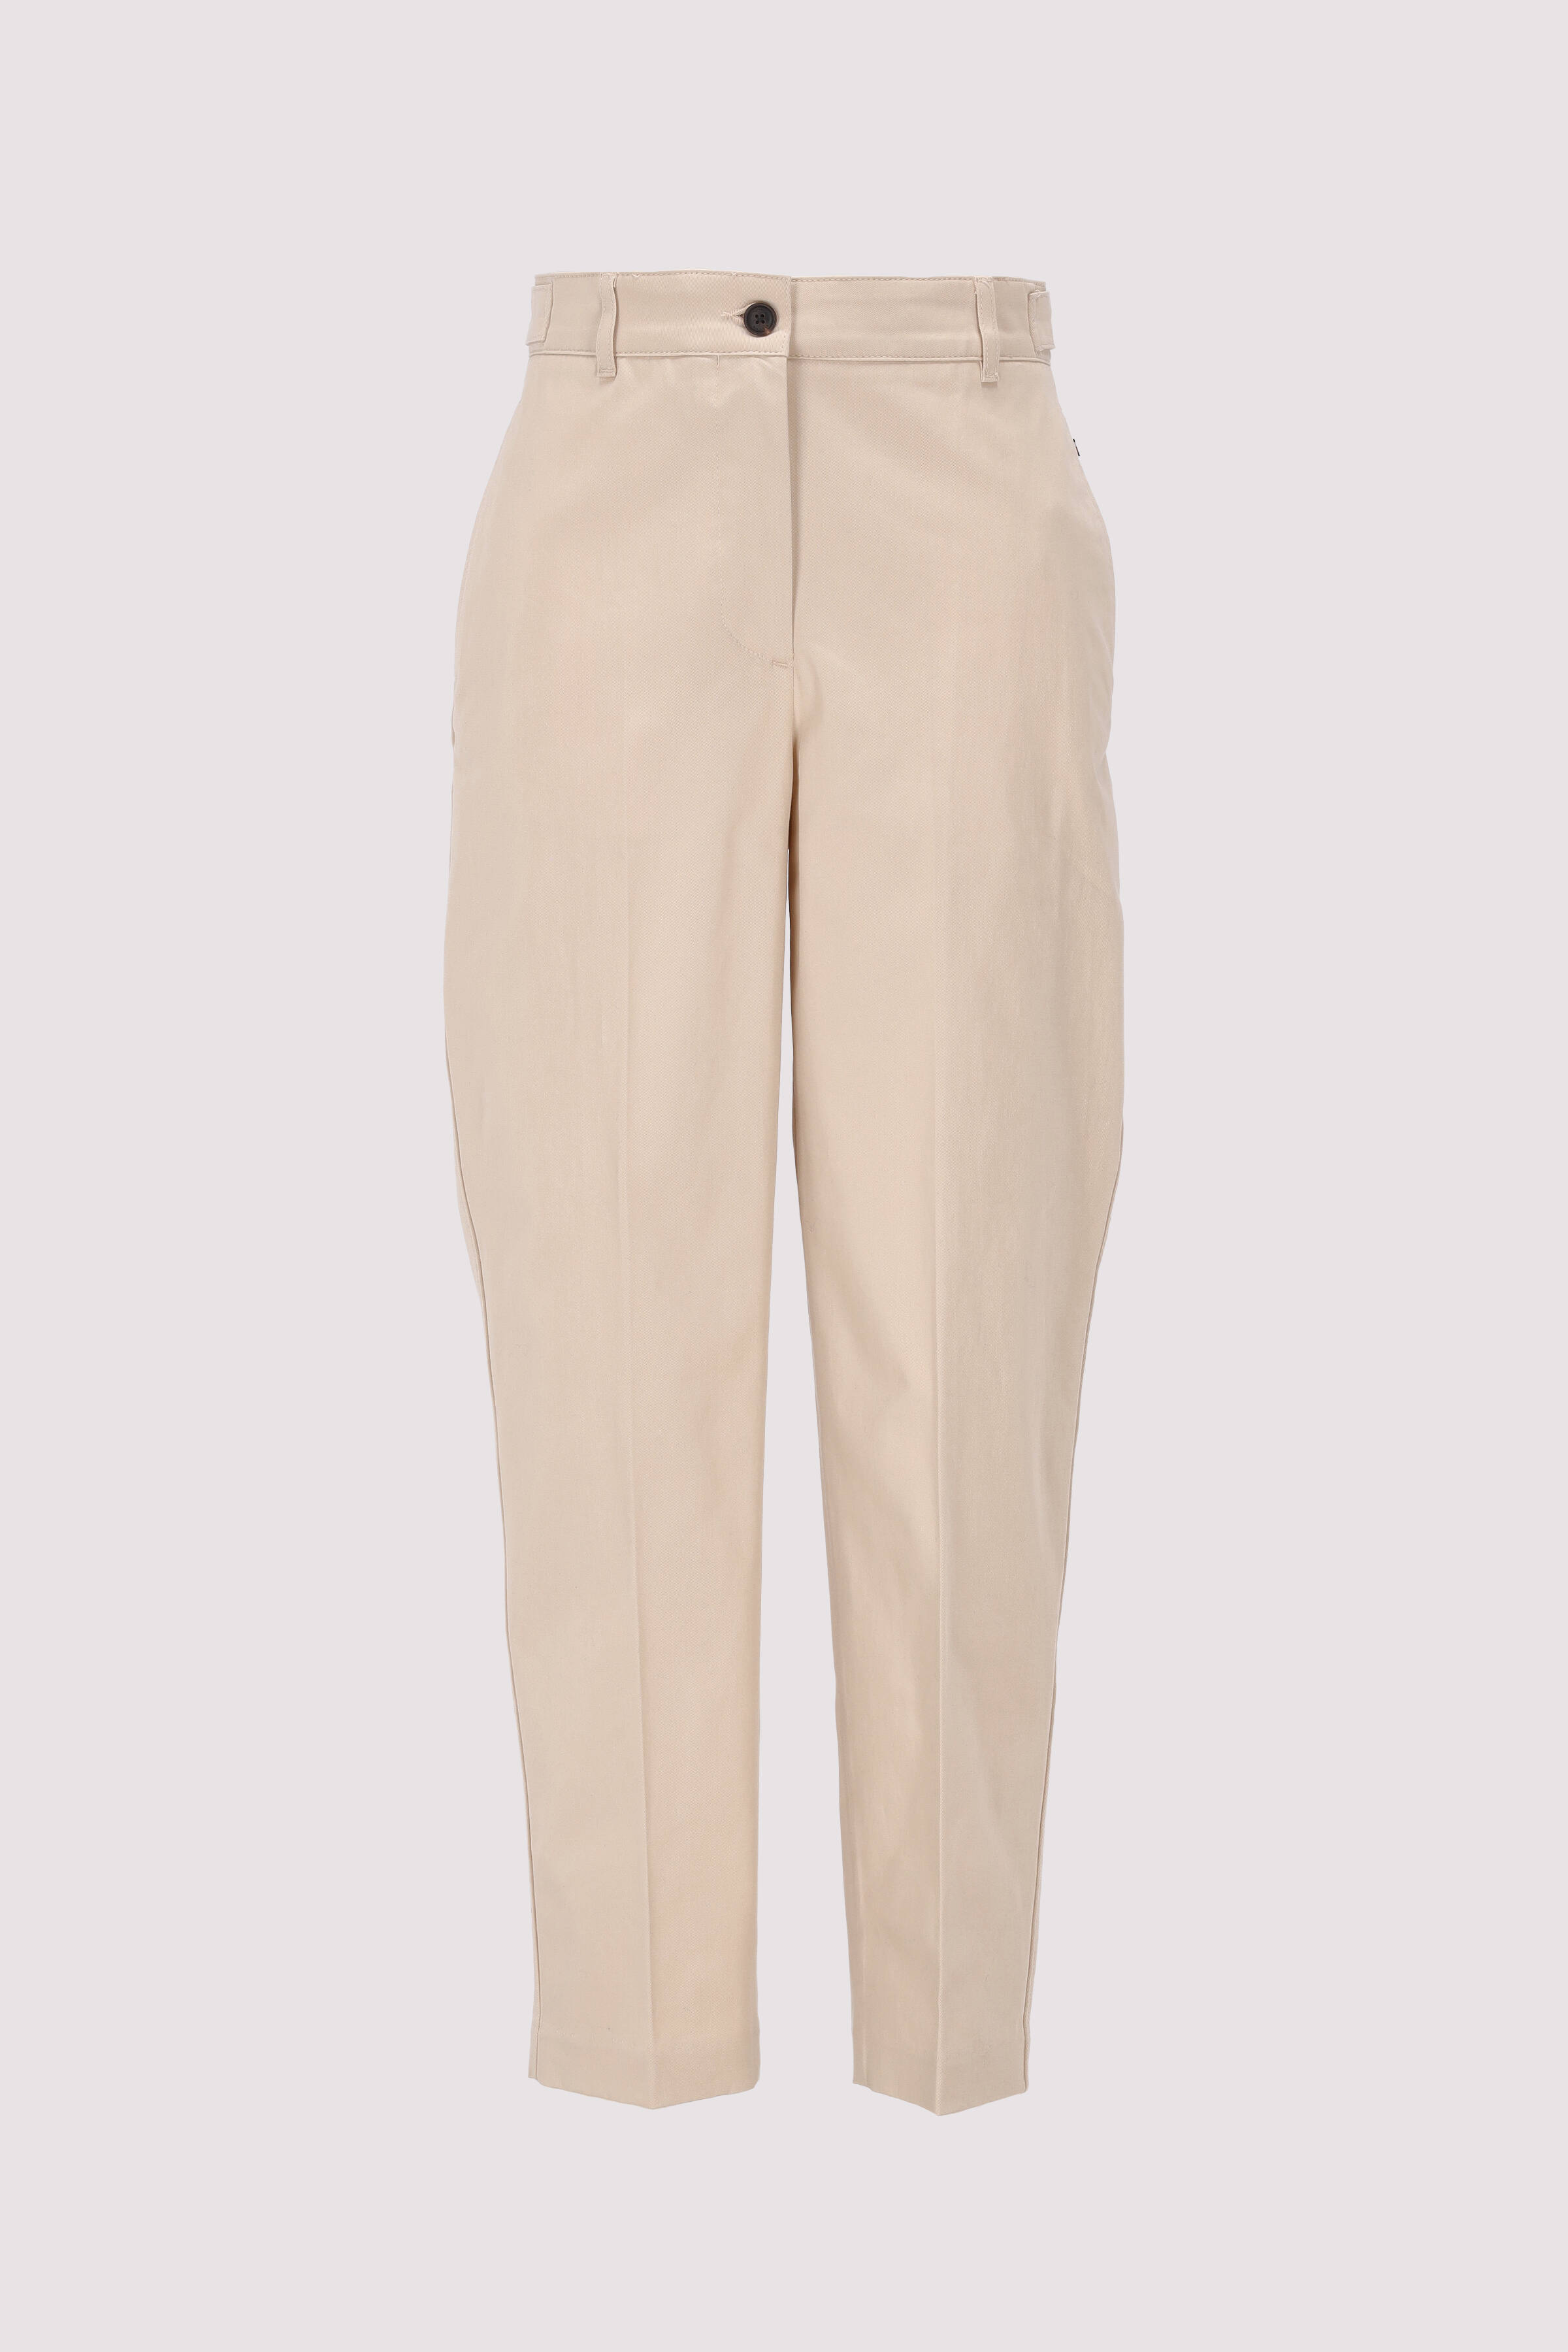 TAPERED CO TWILL CHINO PANT